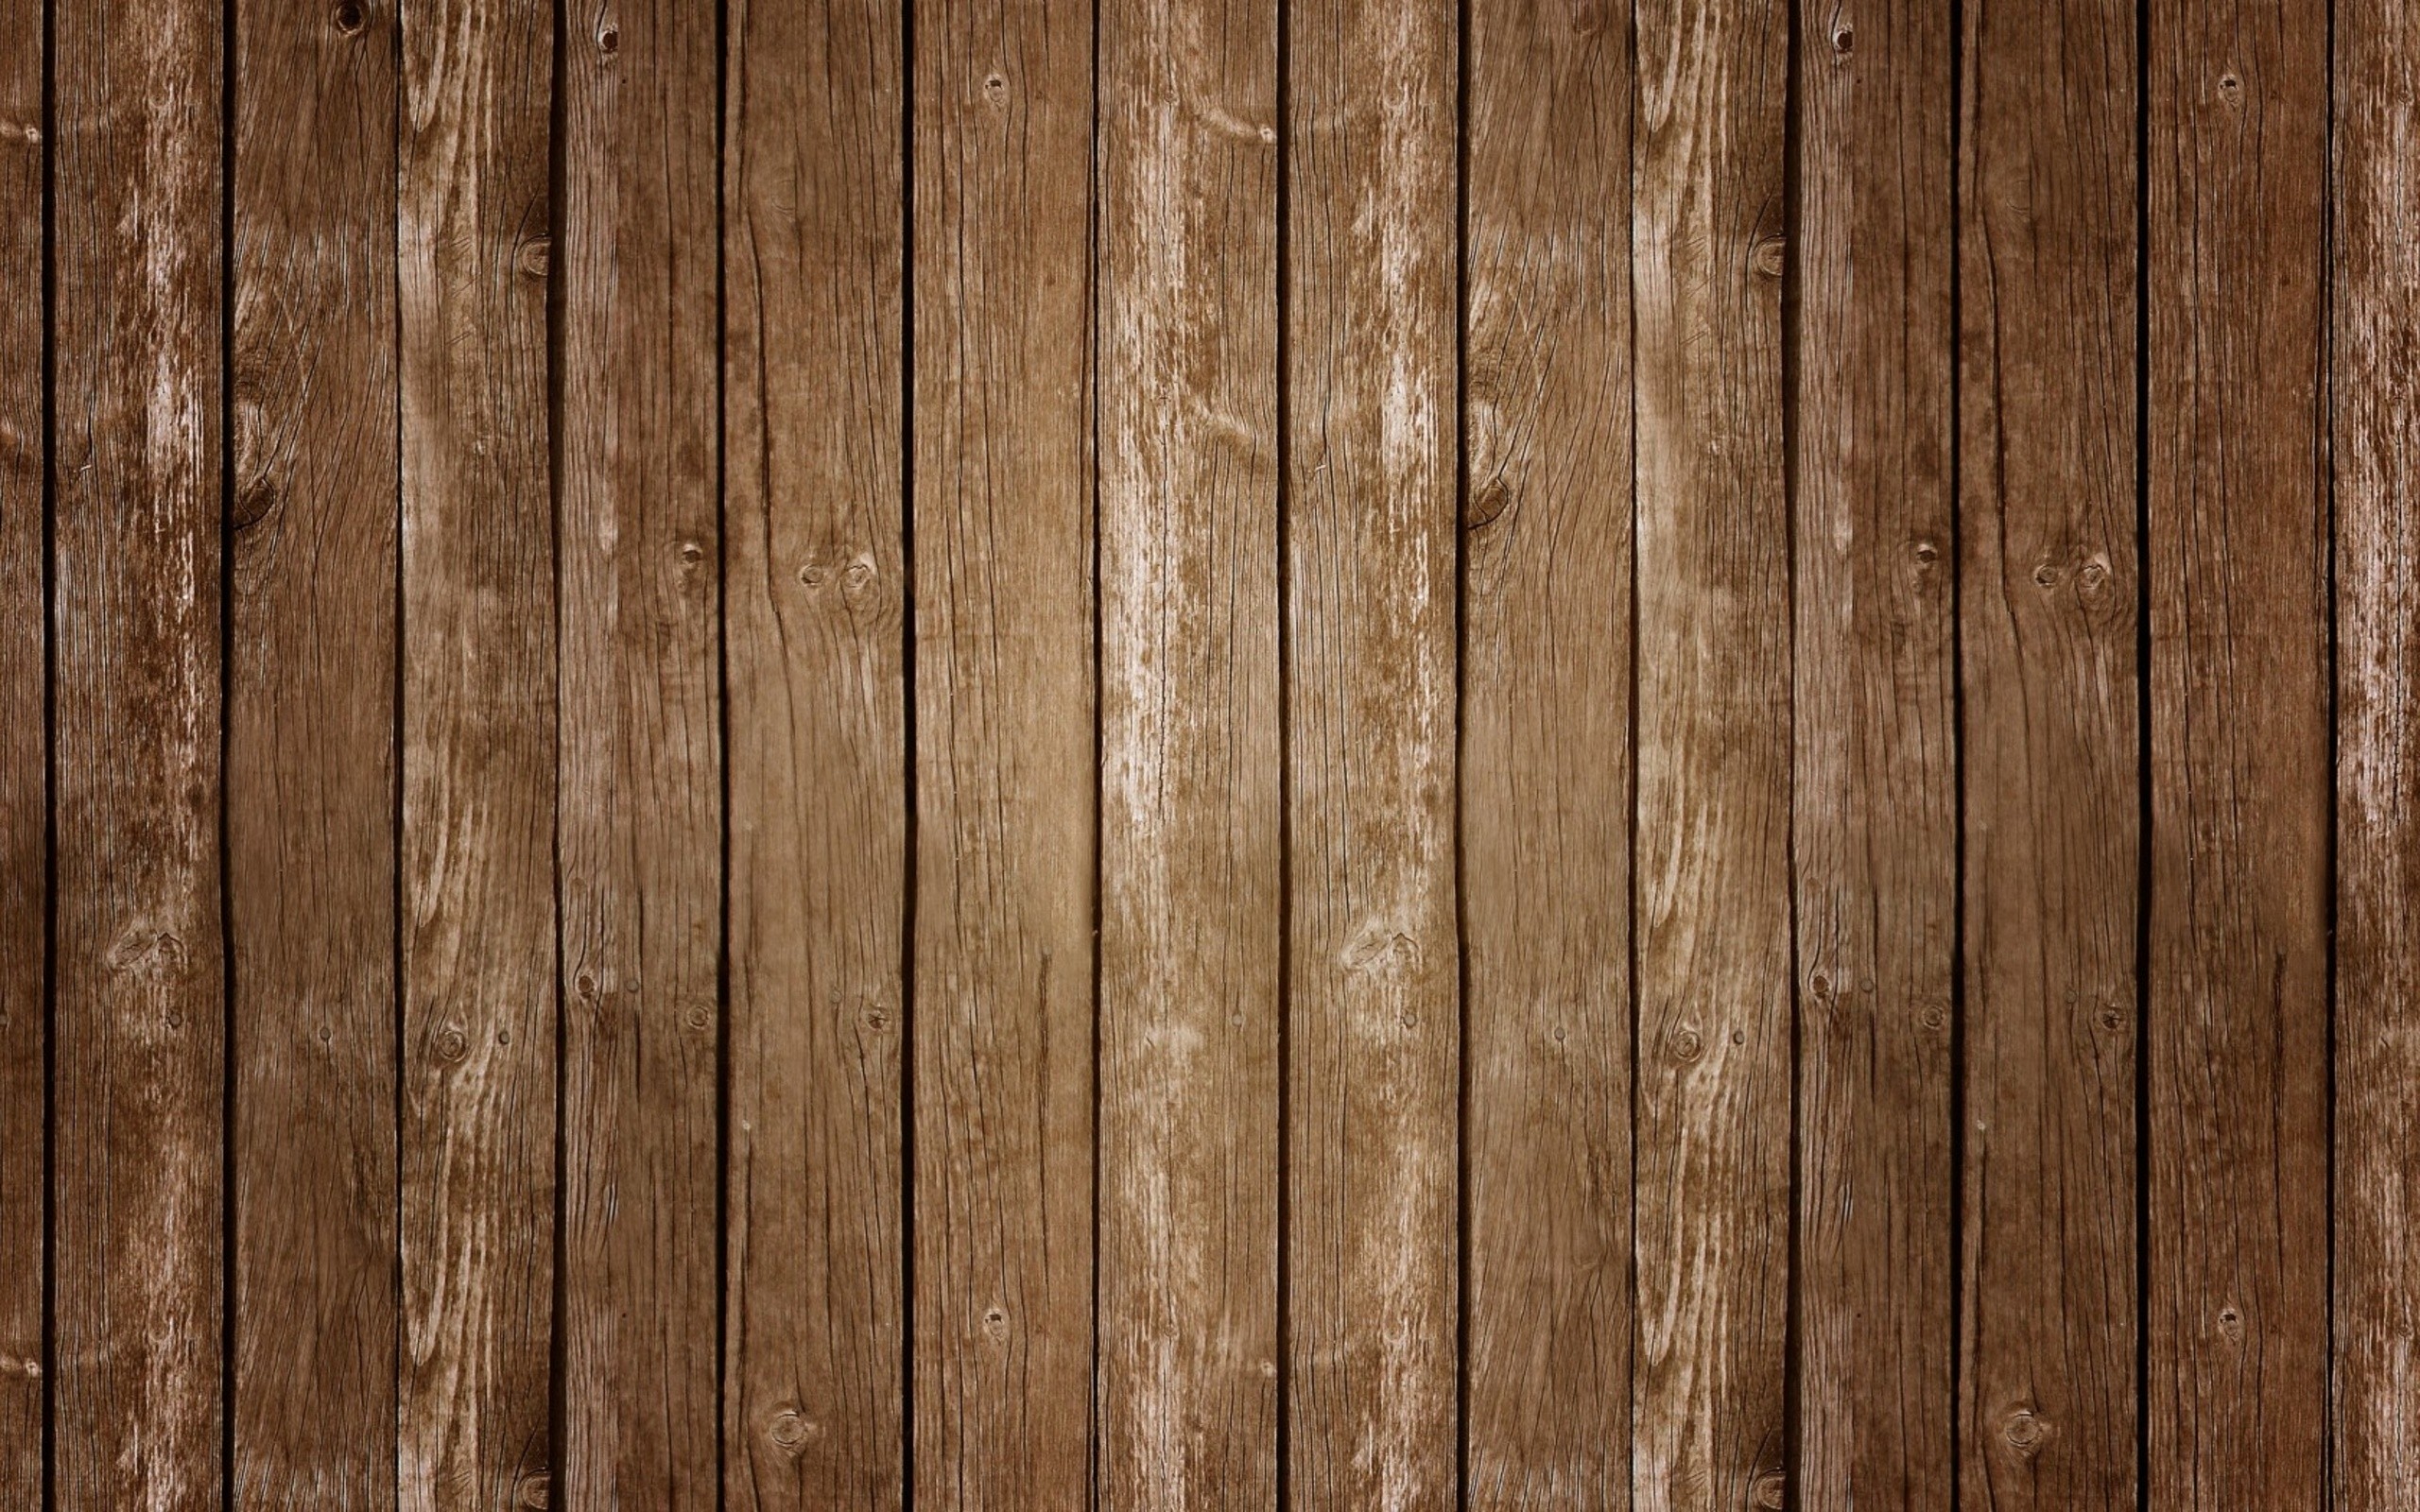 Barn Wood  background    Download free awesome backgrounds  